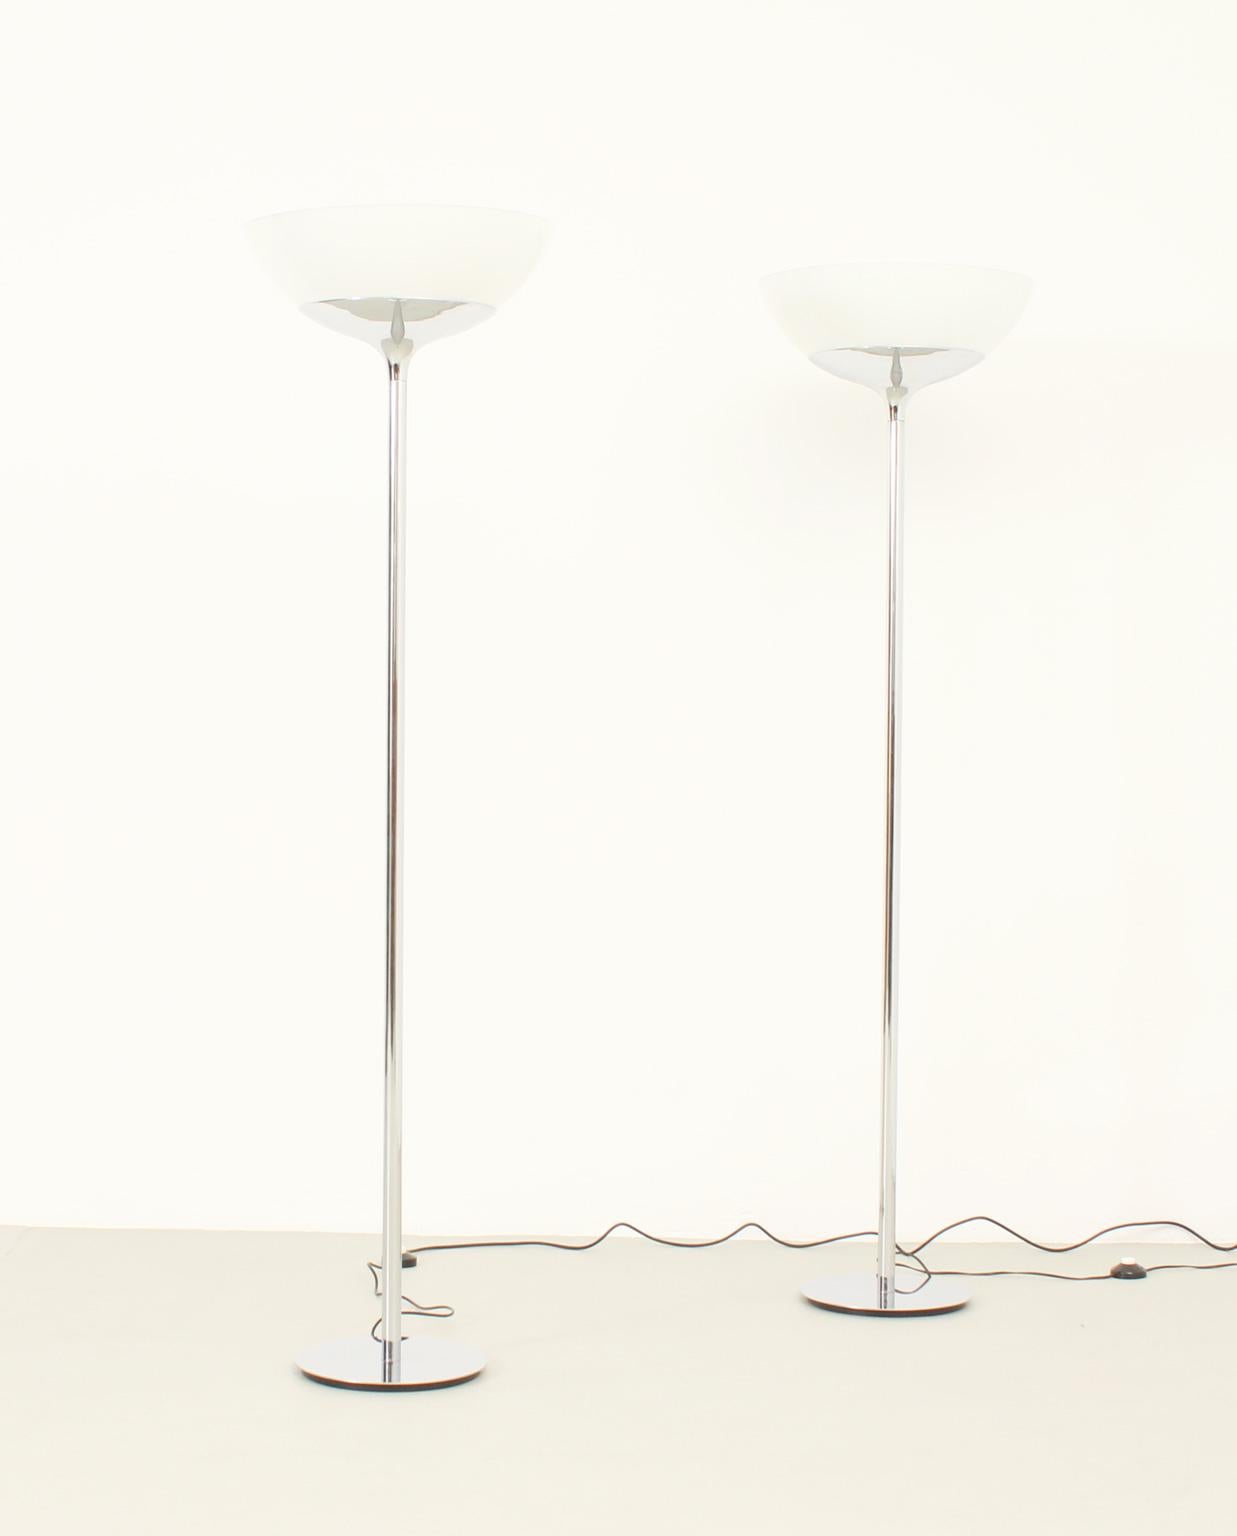 Pair of Aminta floor lamps designed by Emma Gismondi Schweinberger in 1966 for Artemide, Italy. Chromed steel base and white opal glass reflector.